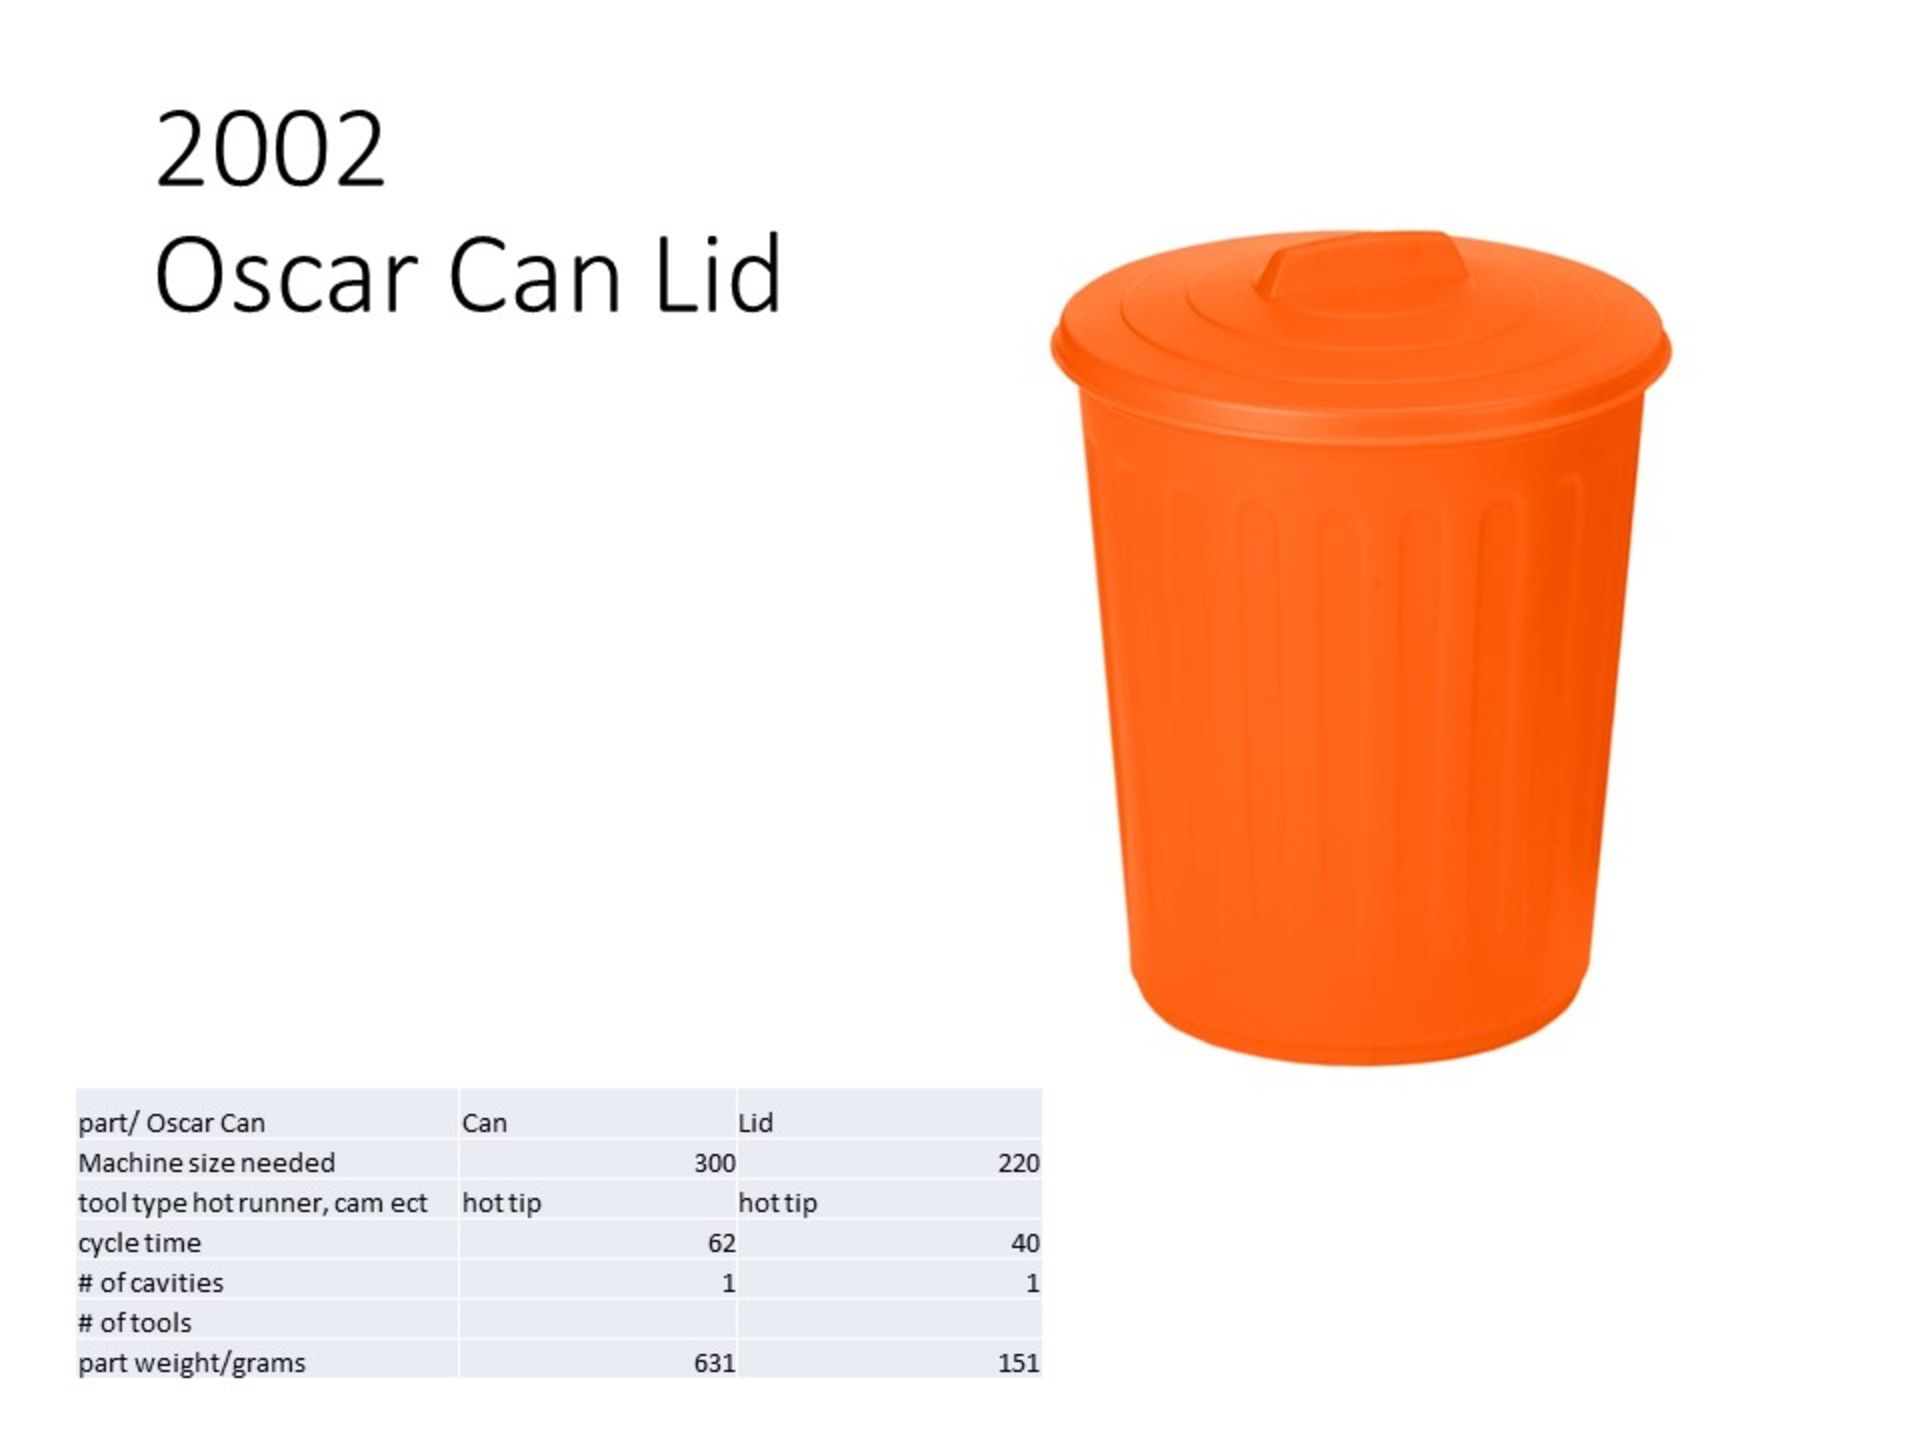 PLASTIC INJECTION MOLD - Oscar Can Lid